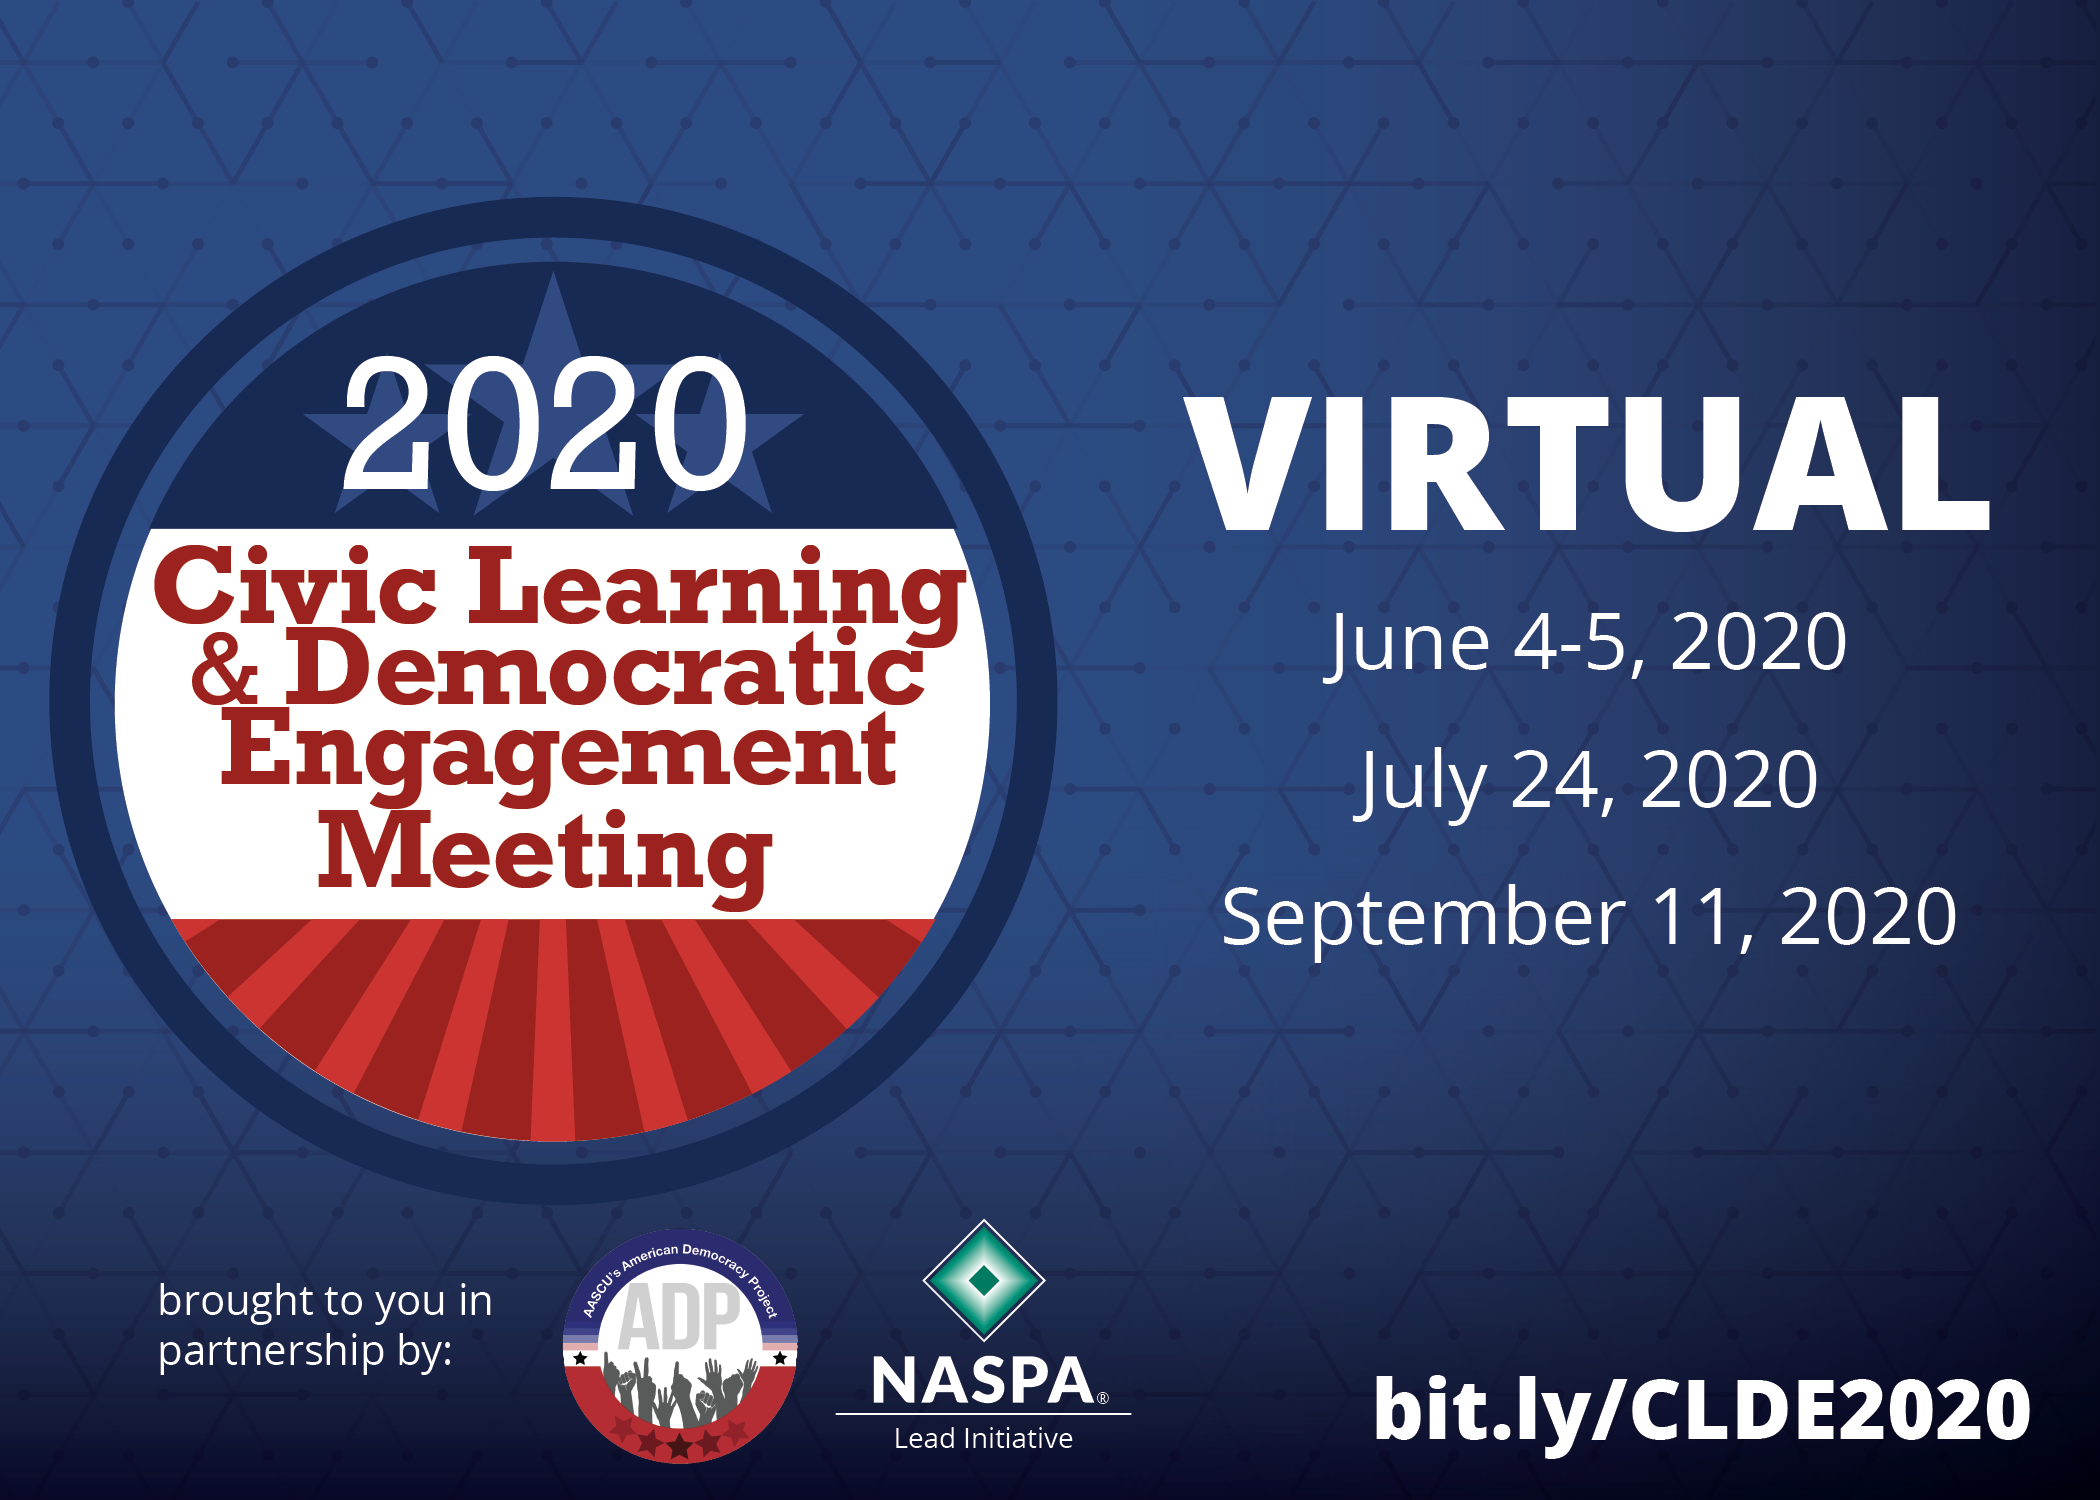 2020 Civic Learning and Democratic Engagement Meeting